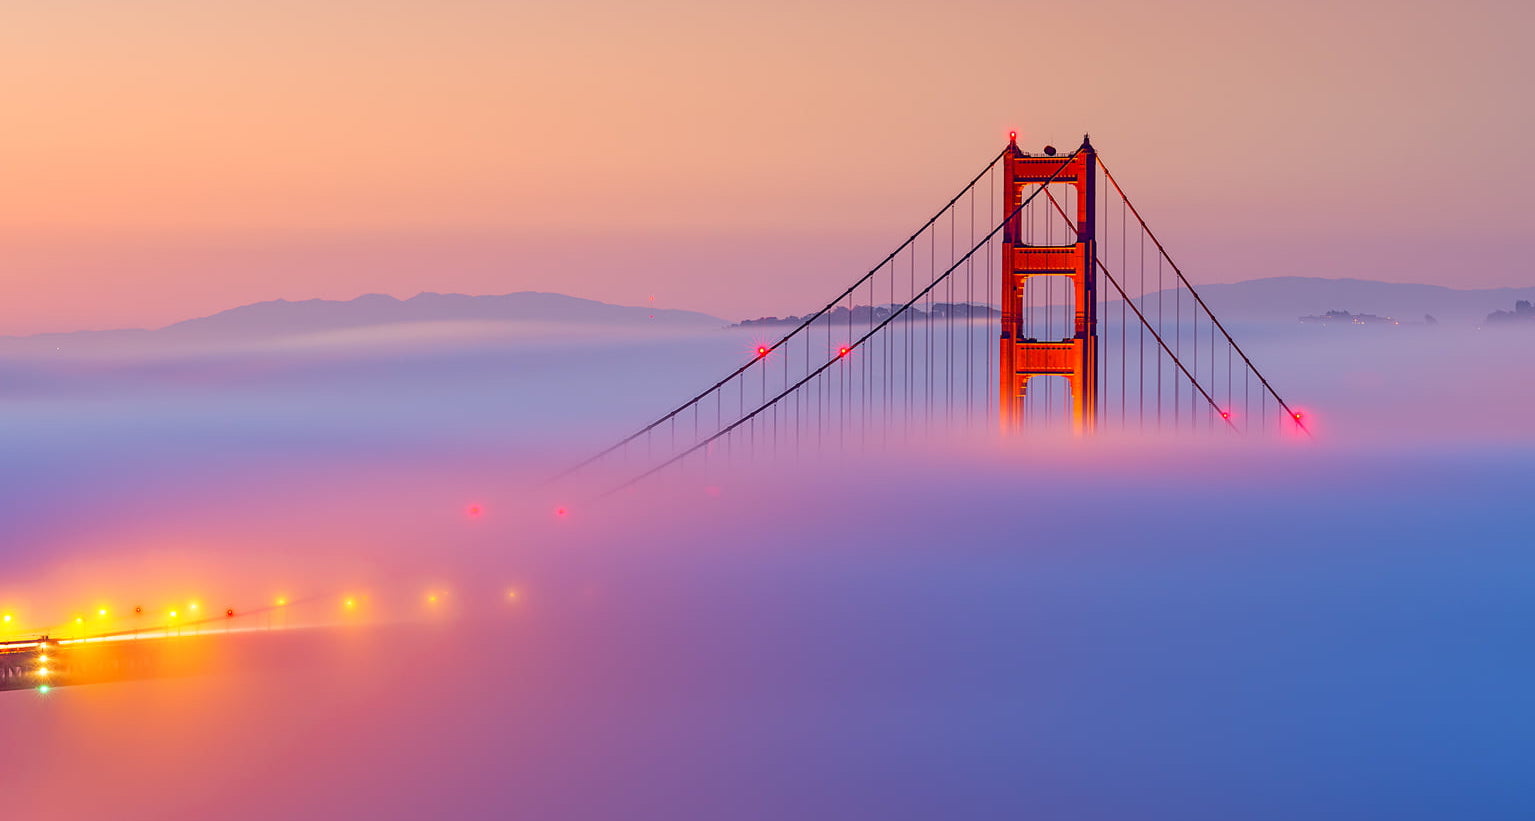 Golden gate bridge with fog in the lower parts. Purple and very scenic image.